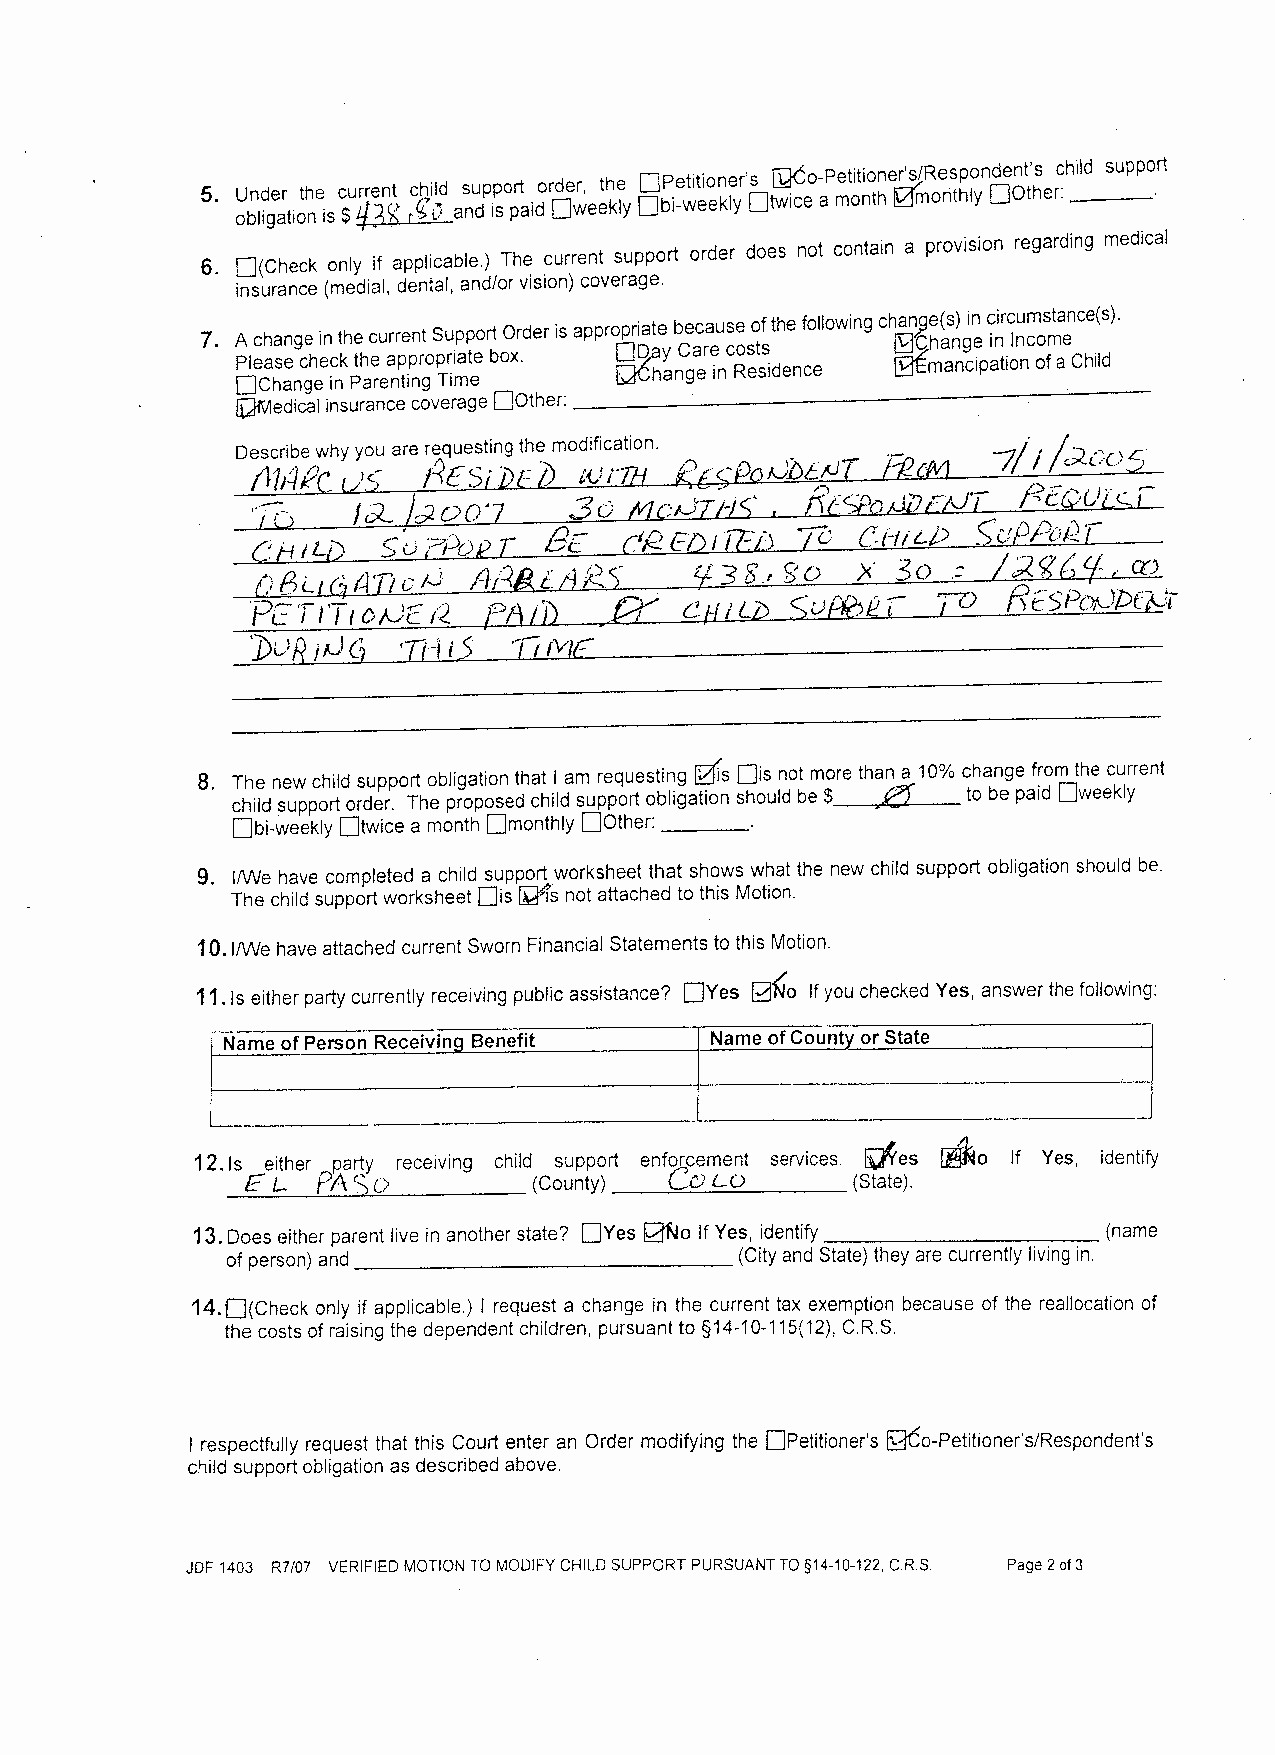 50 Lovely Colorado Child Support Worksheet Excel DOCUMENTS IDEAS Document